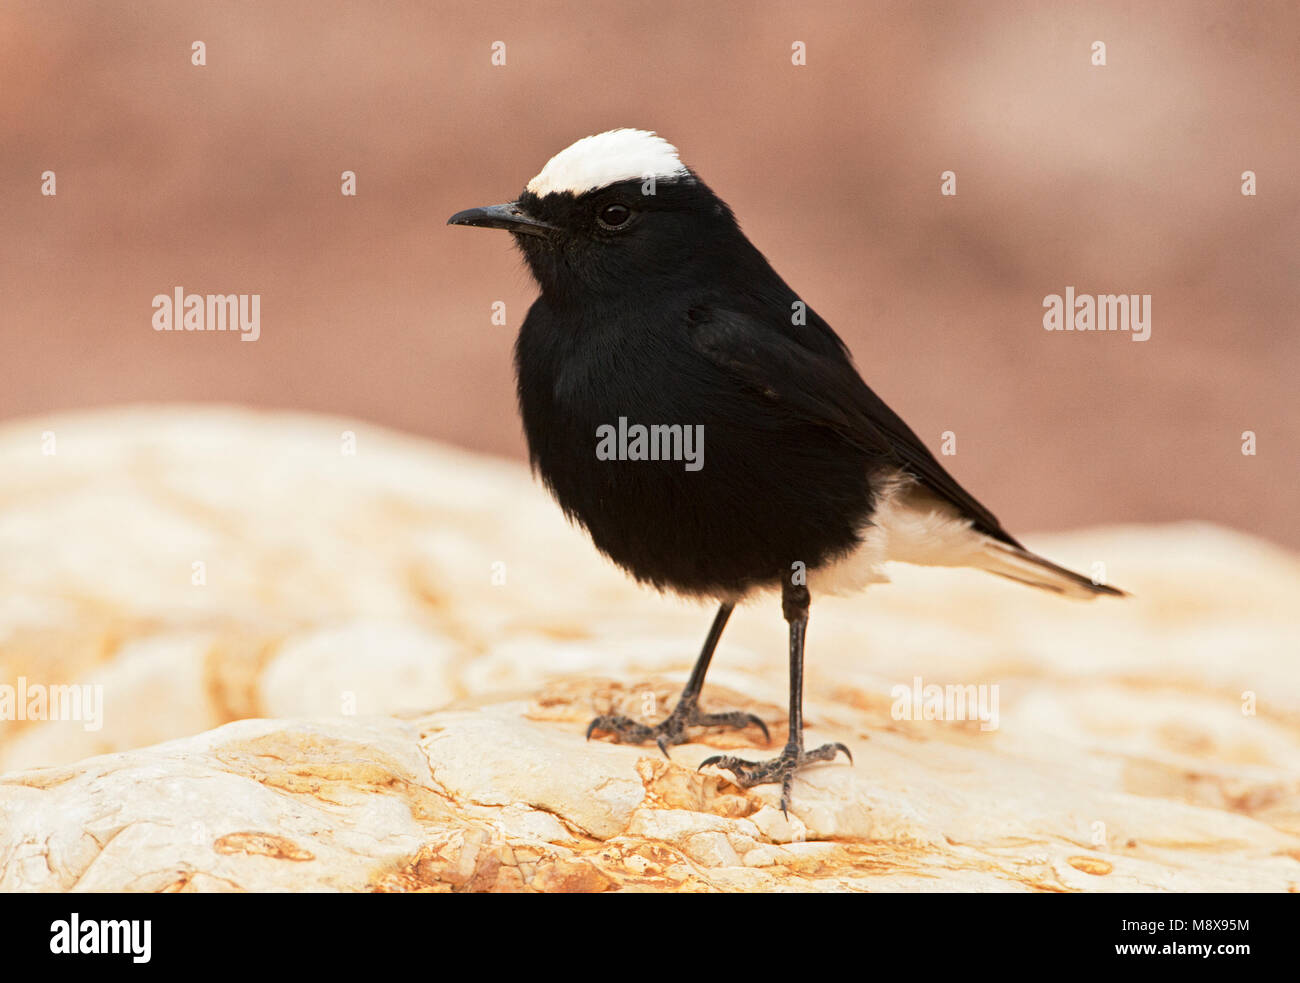 Witkruintapuit zittend; White-crowned Wheatear perched Stock Photo